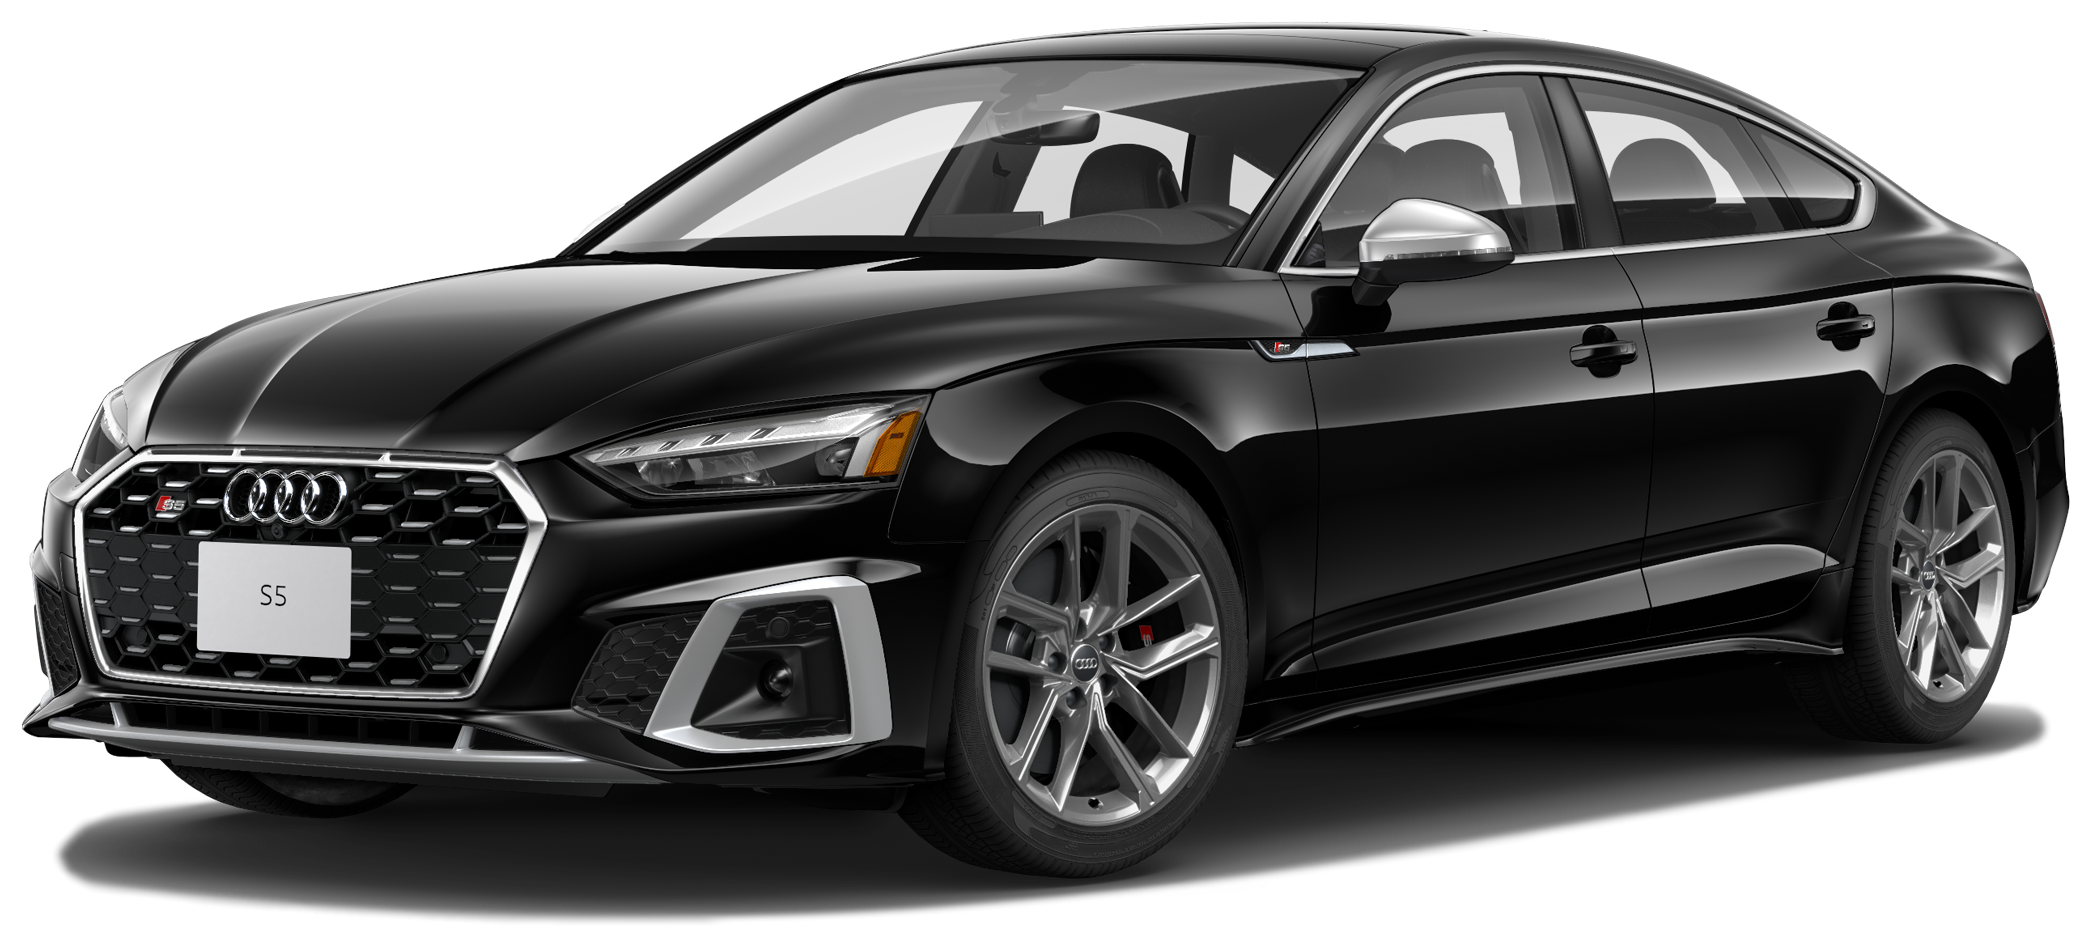 2021 Audi S5 Incentives, Specials & Offers in Greensboro NC